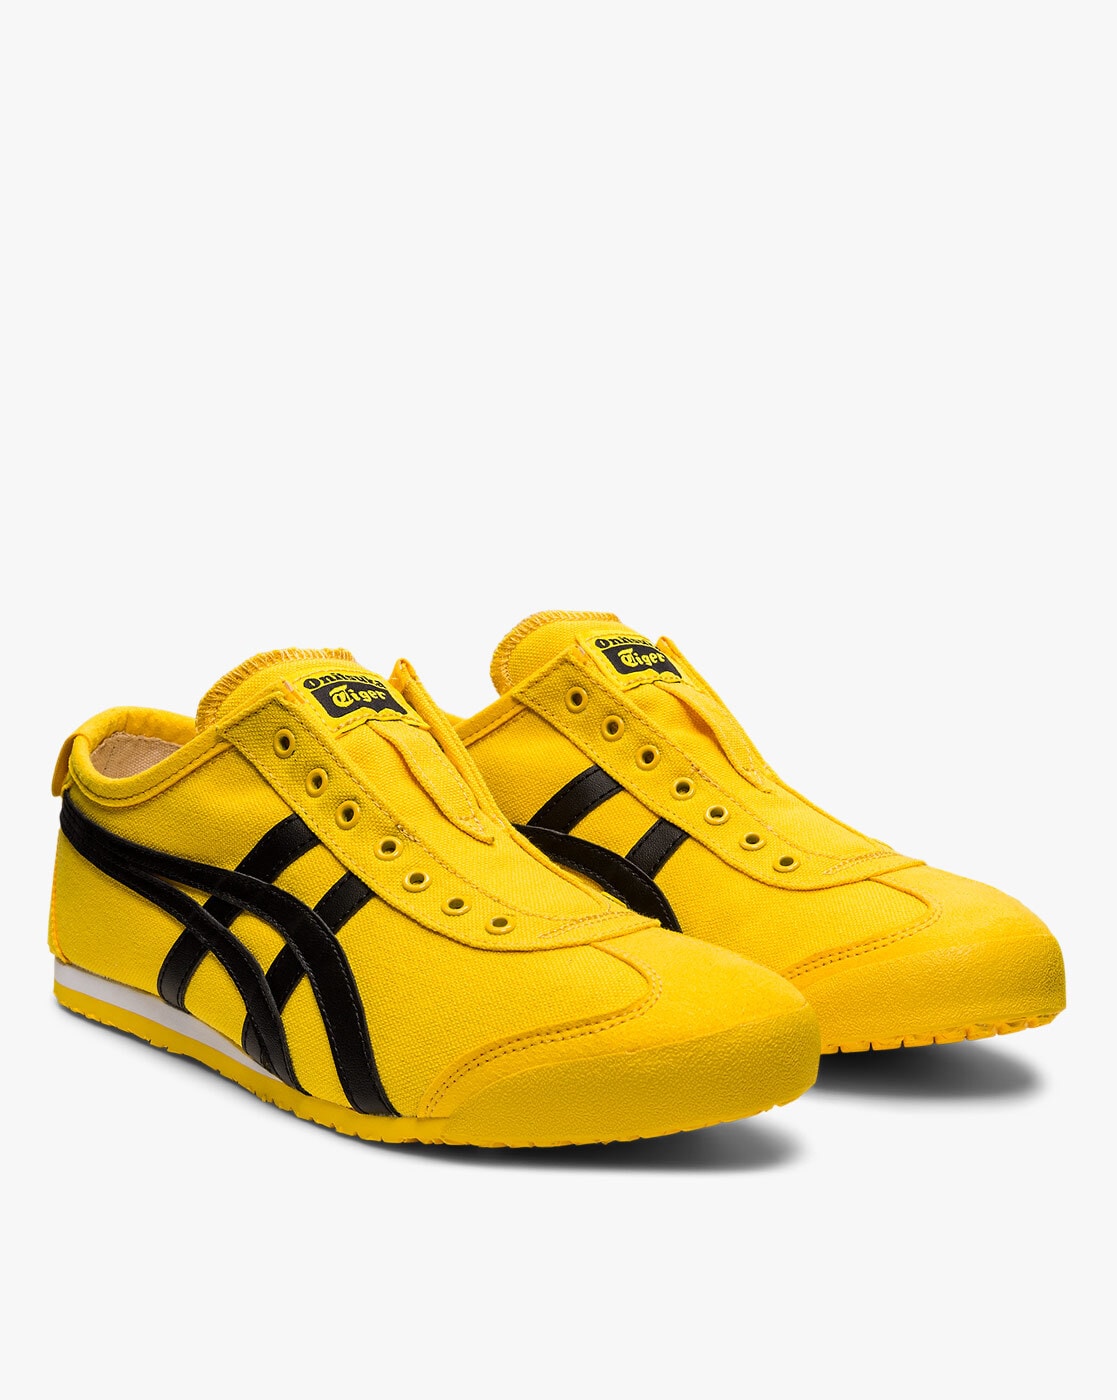 Asics Tiger Yellow Sneakers | vlr.eng.br